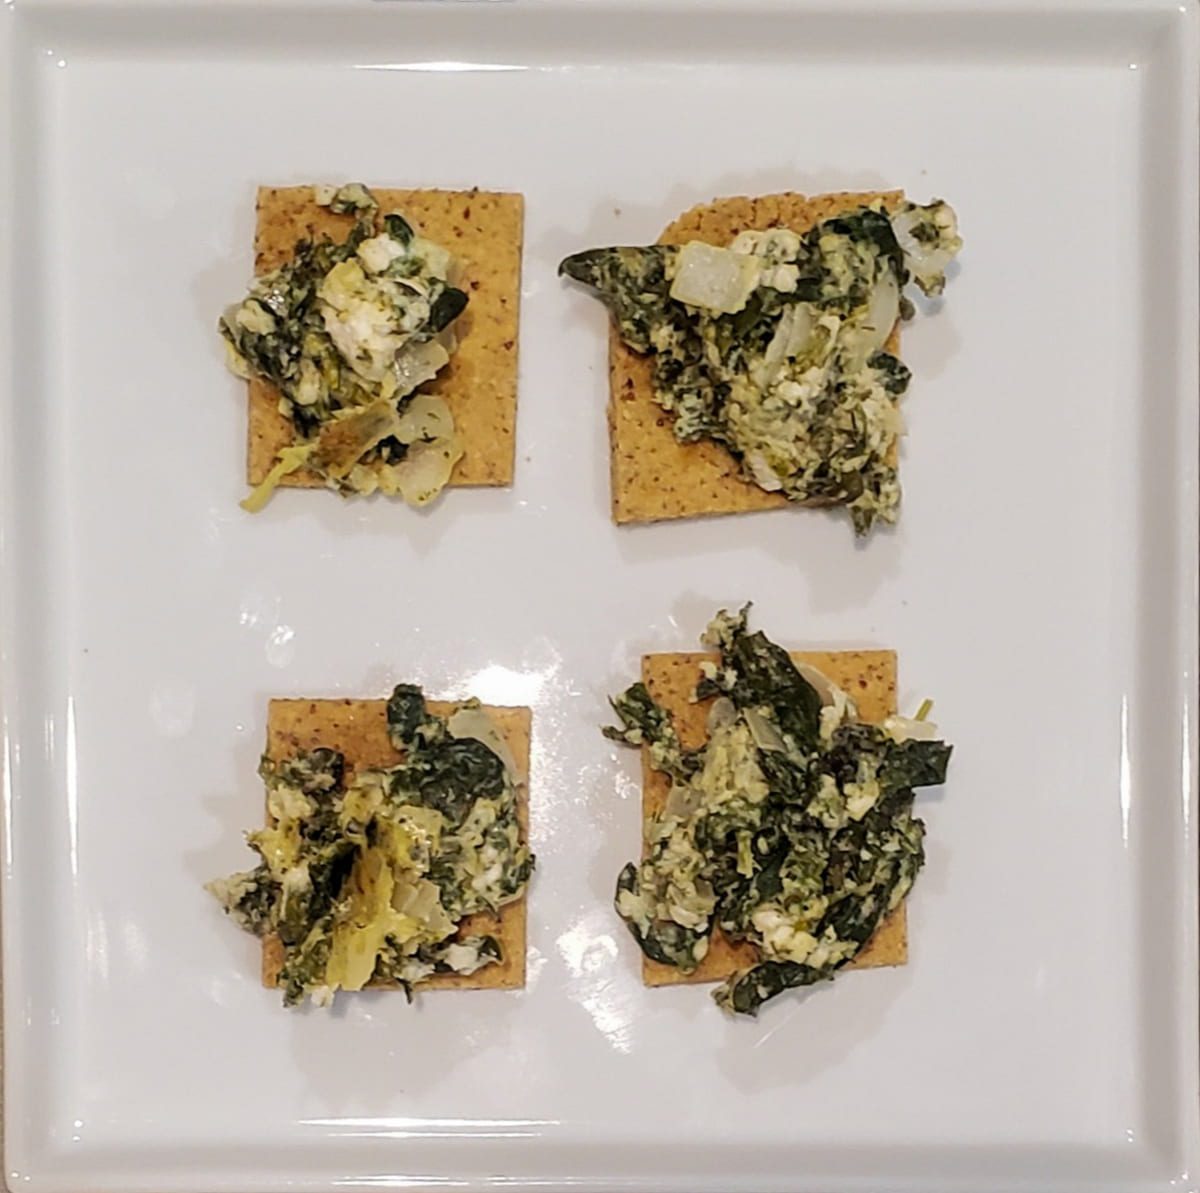 Spanakopita dip on a gluten free cracker from cleveland cooking